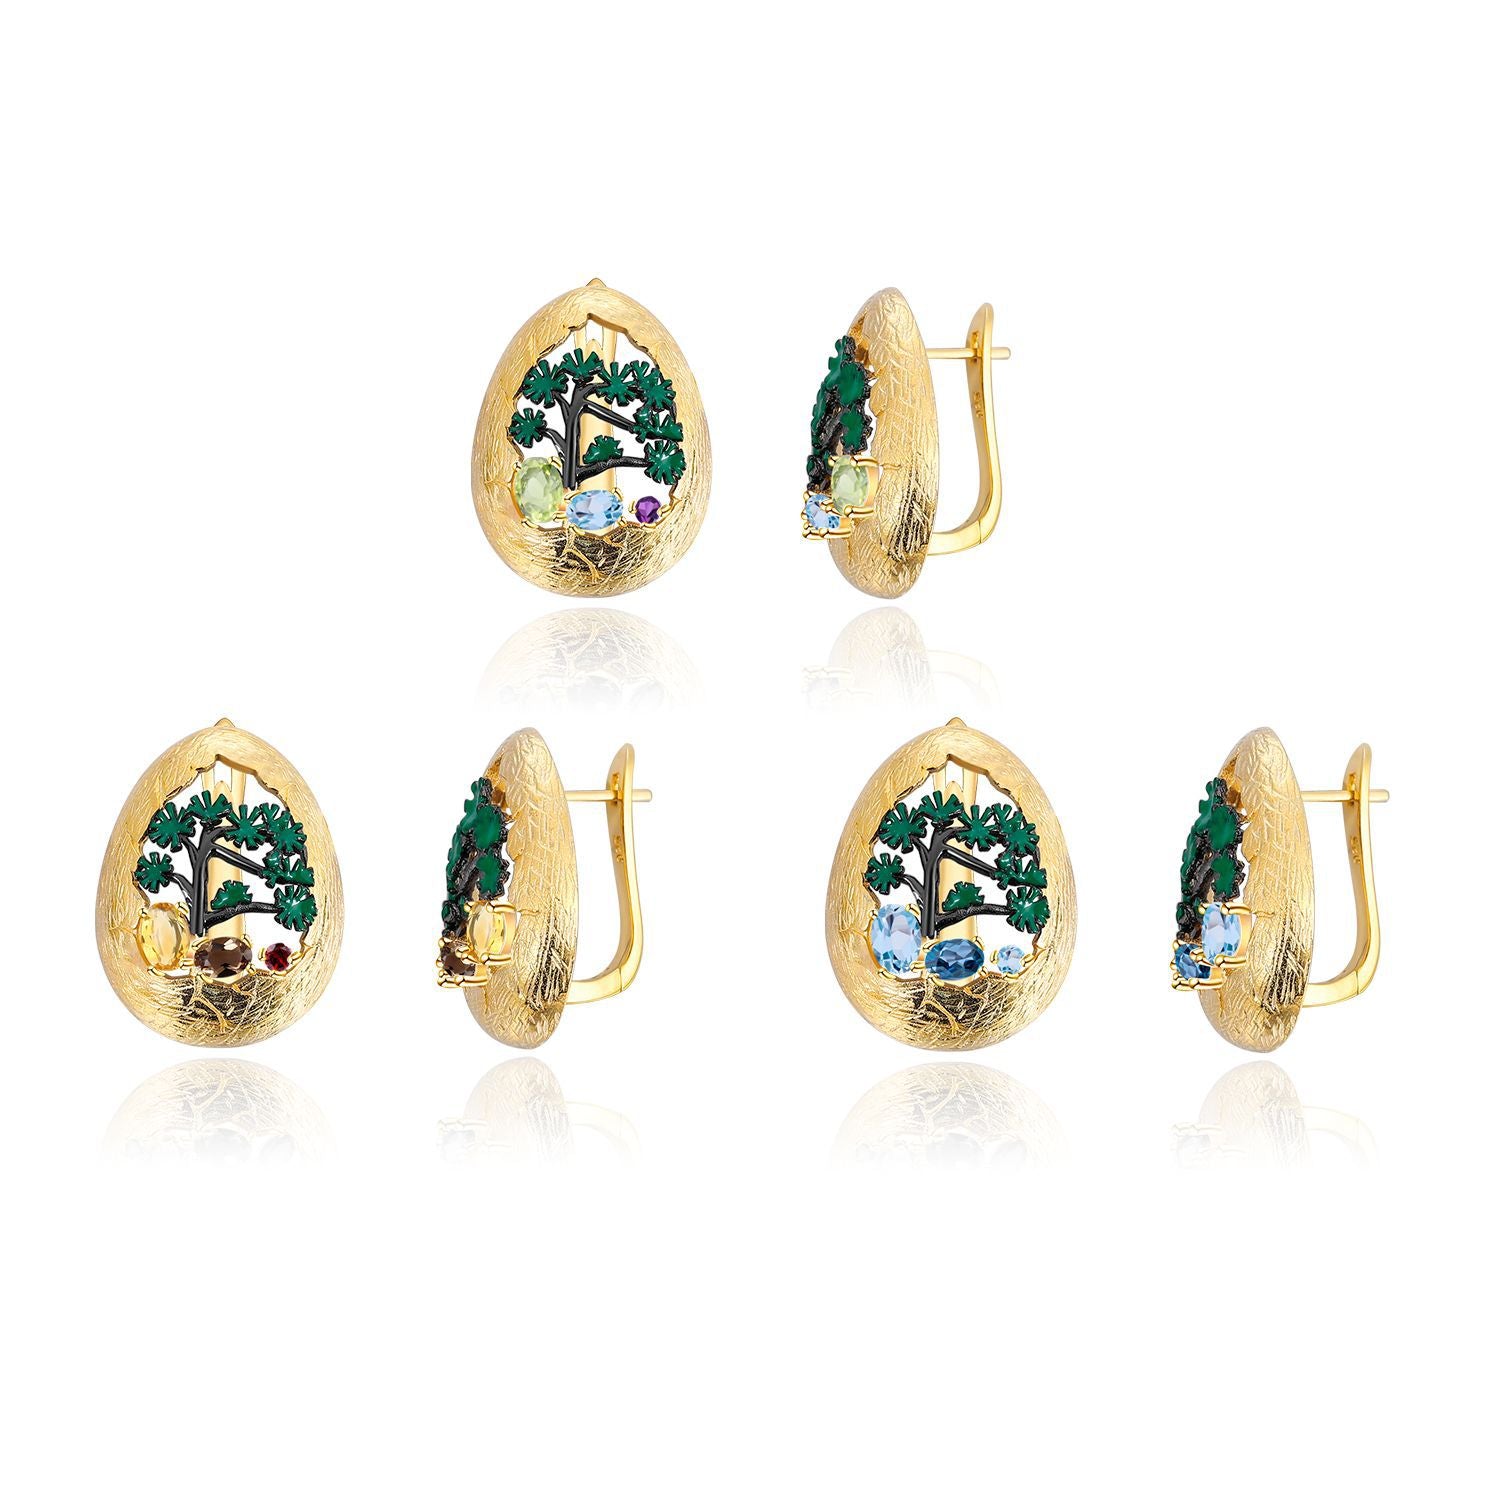 Retro Natural Style Inlaid Colourful Gemstone Egg Shape with Forest Silver Studs Earrings for Women